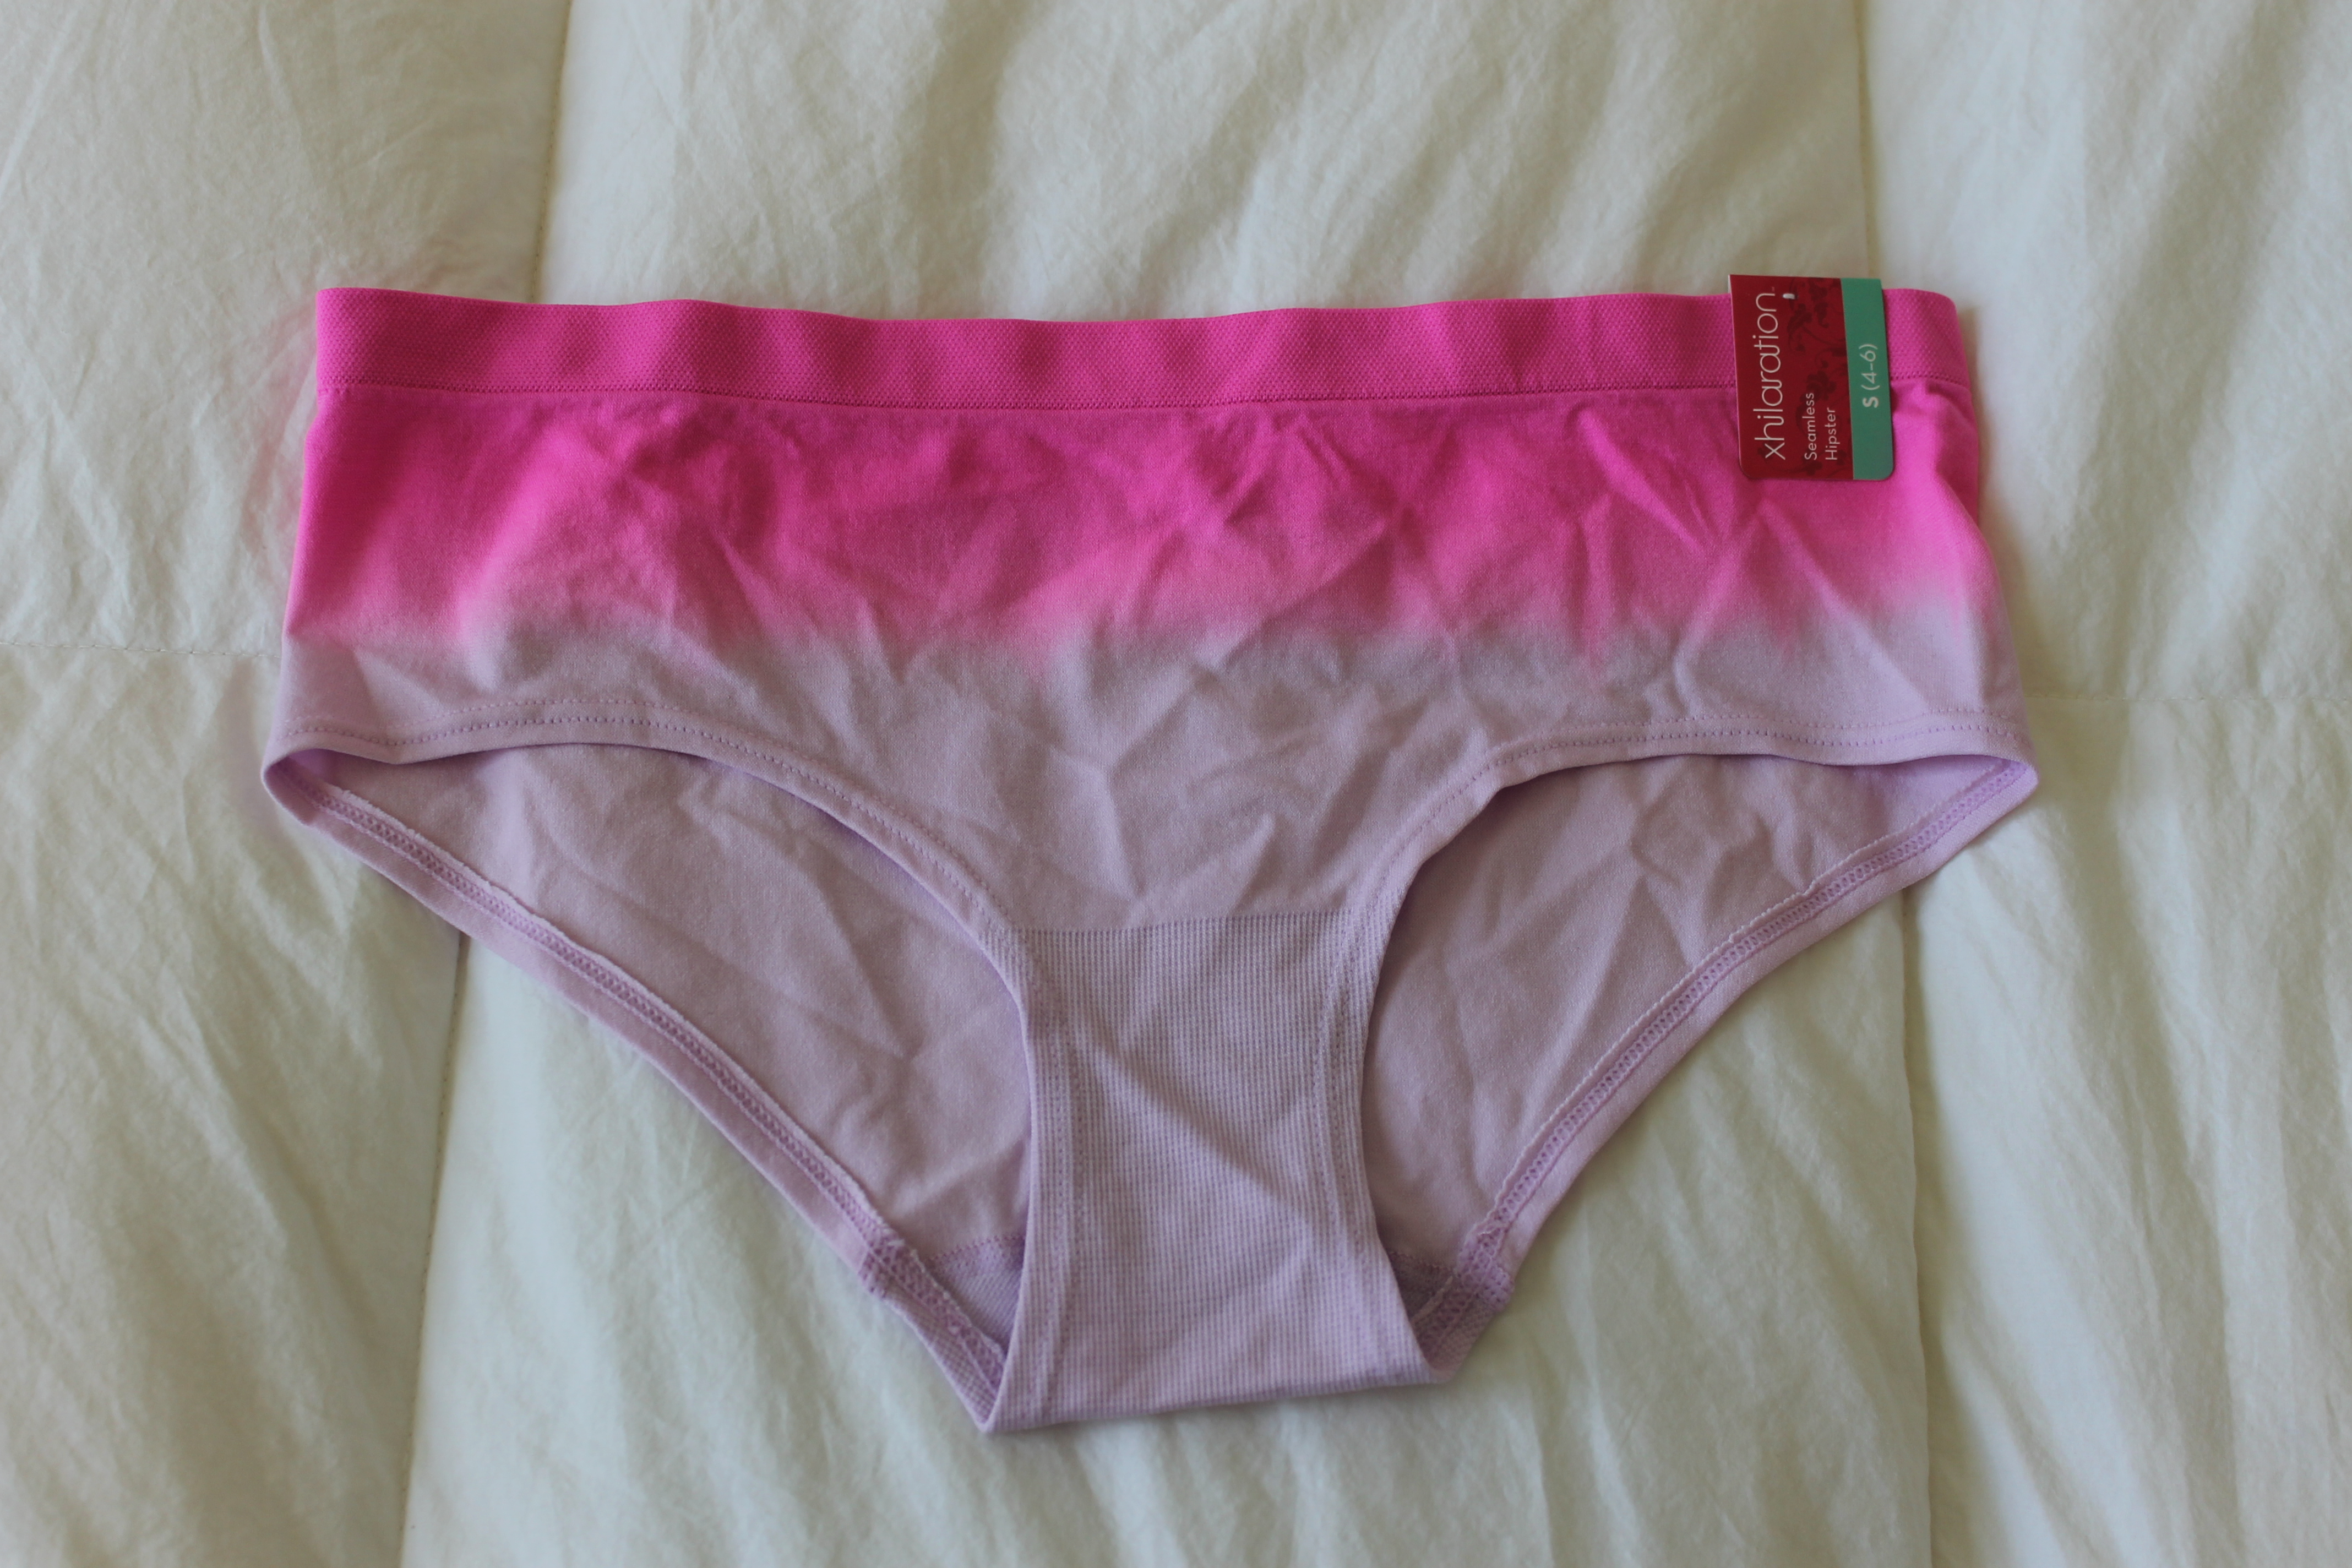 PINK Victoria's Secret, Intimates & Sleepwear, Pick 2 2 For 8 Vs Pink  Cheekster And Hipster Panties